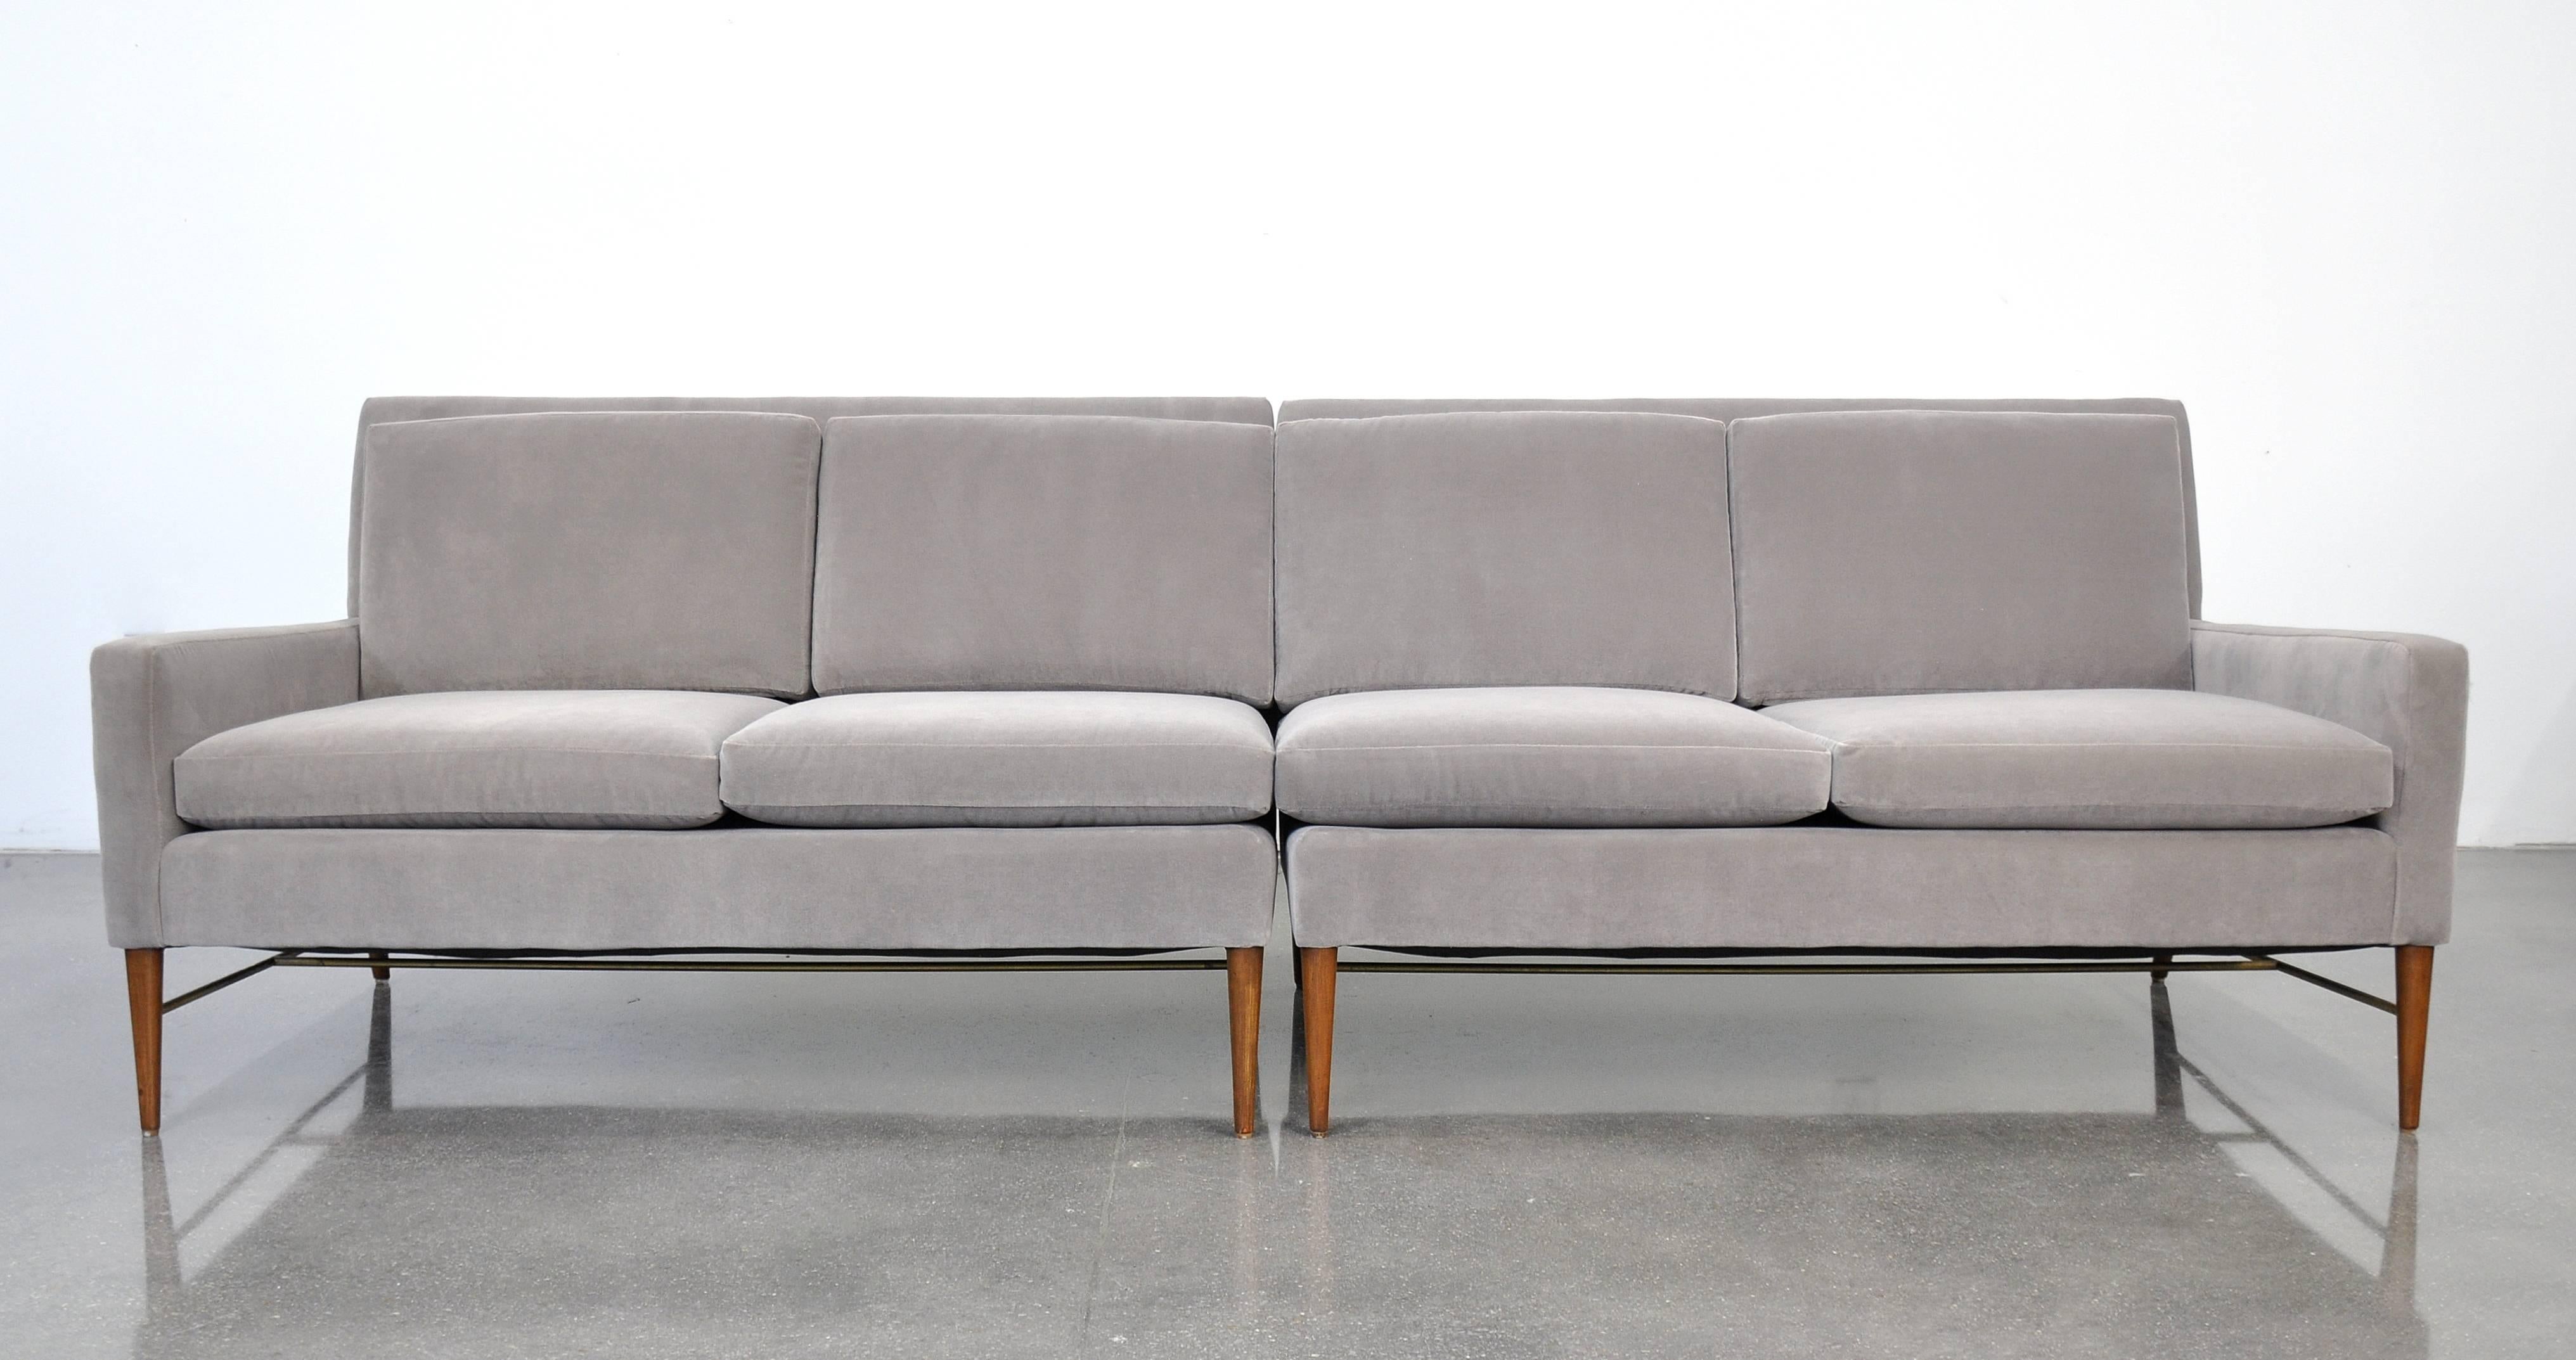 Exquisite pair of Mid-Century Modern model 5004 settees from the coveted Directional collection, dating from the 1950s. The reupholstered two-piece couch has been recovered in a stunning light gray 100% cotton velvet. The beautifully sculpted